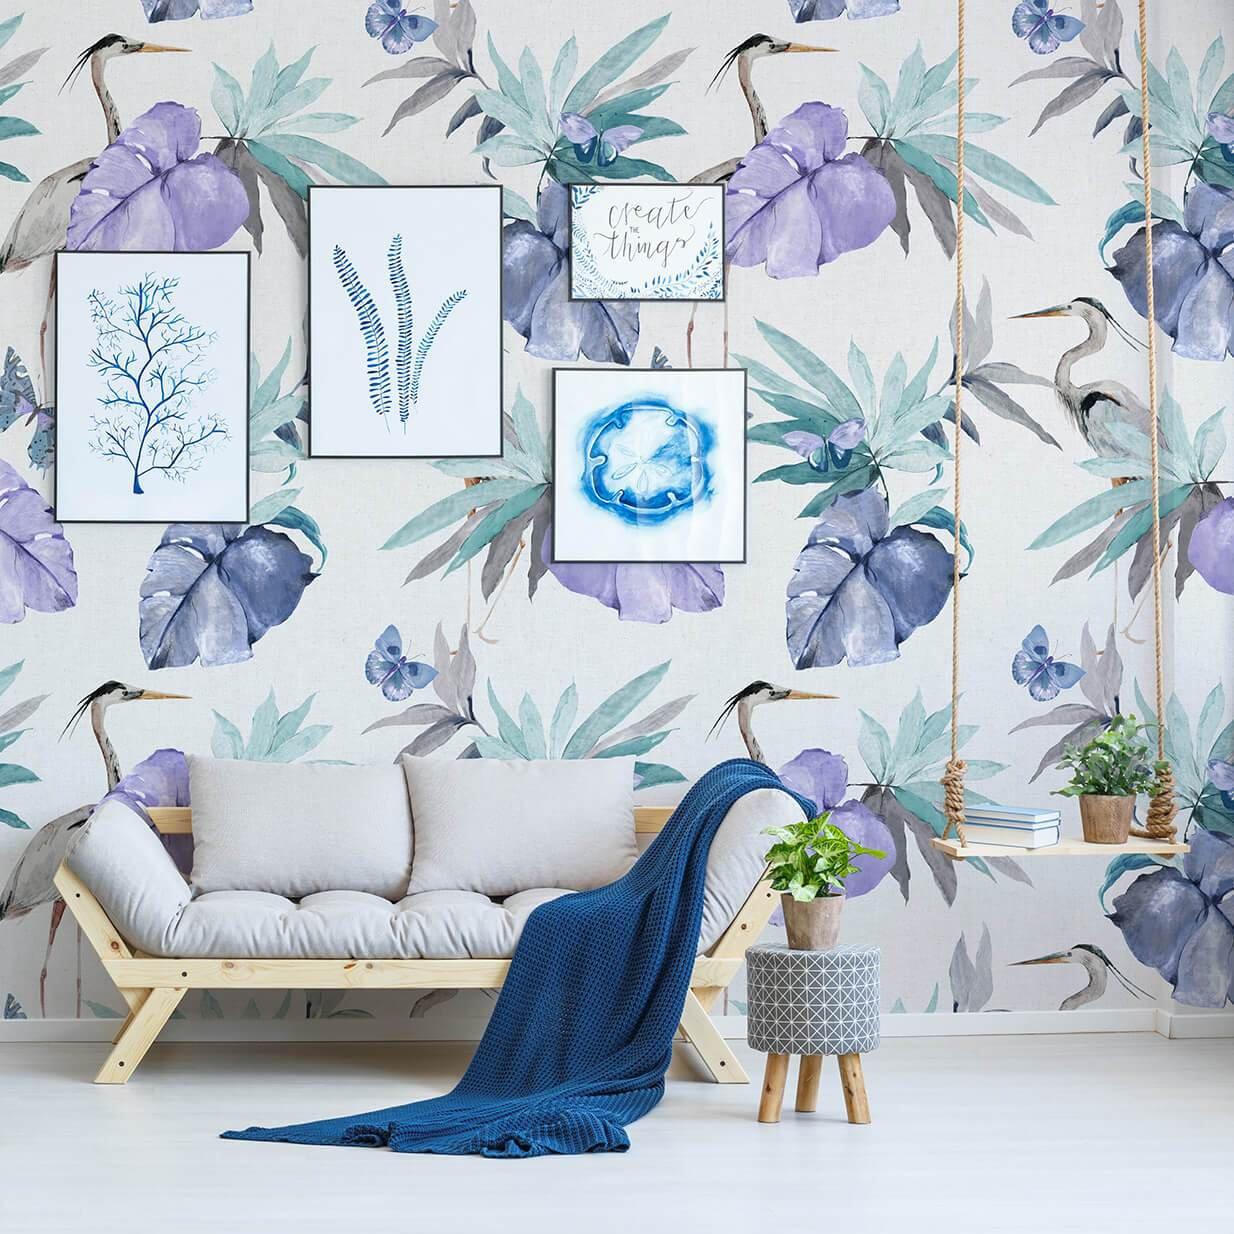 Lilies of the Nile Mural Wallpaper-Wall Decor-BIRD WALLPAPERS, DESIGN WALLPAPERS, ECO MURALS, FLORAL WALLPAPERS, MURALS, MURALS / WALLPAPERS-Forest Homes-Nature inspired decor-Nature decor